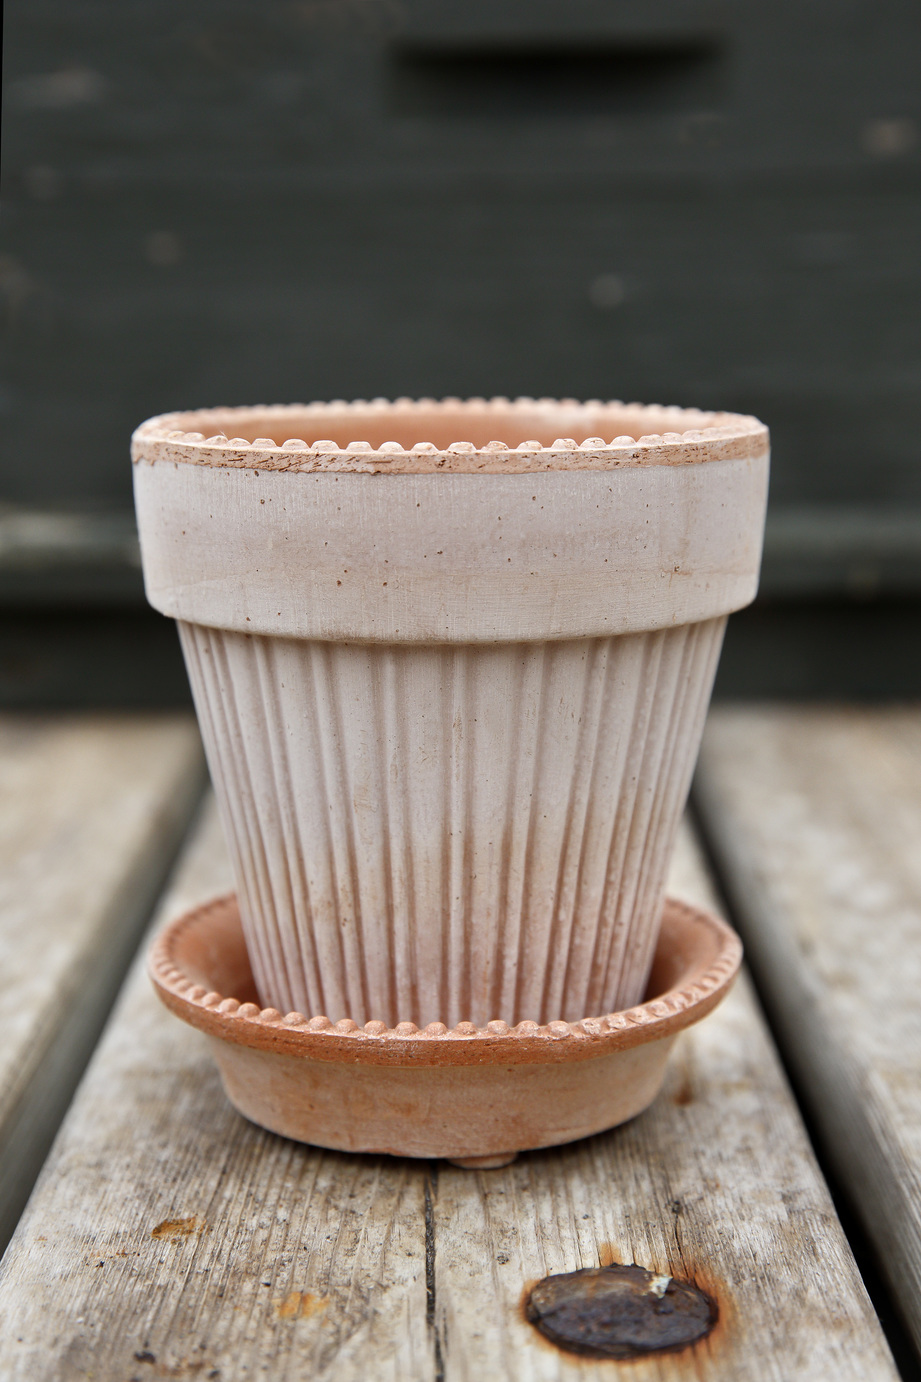 Raw rose terracotta pot with small pearls along the upper rim.